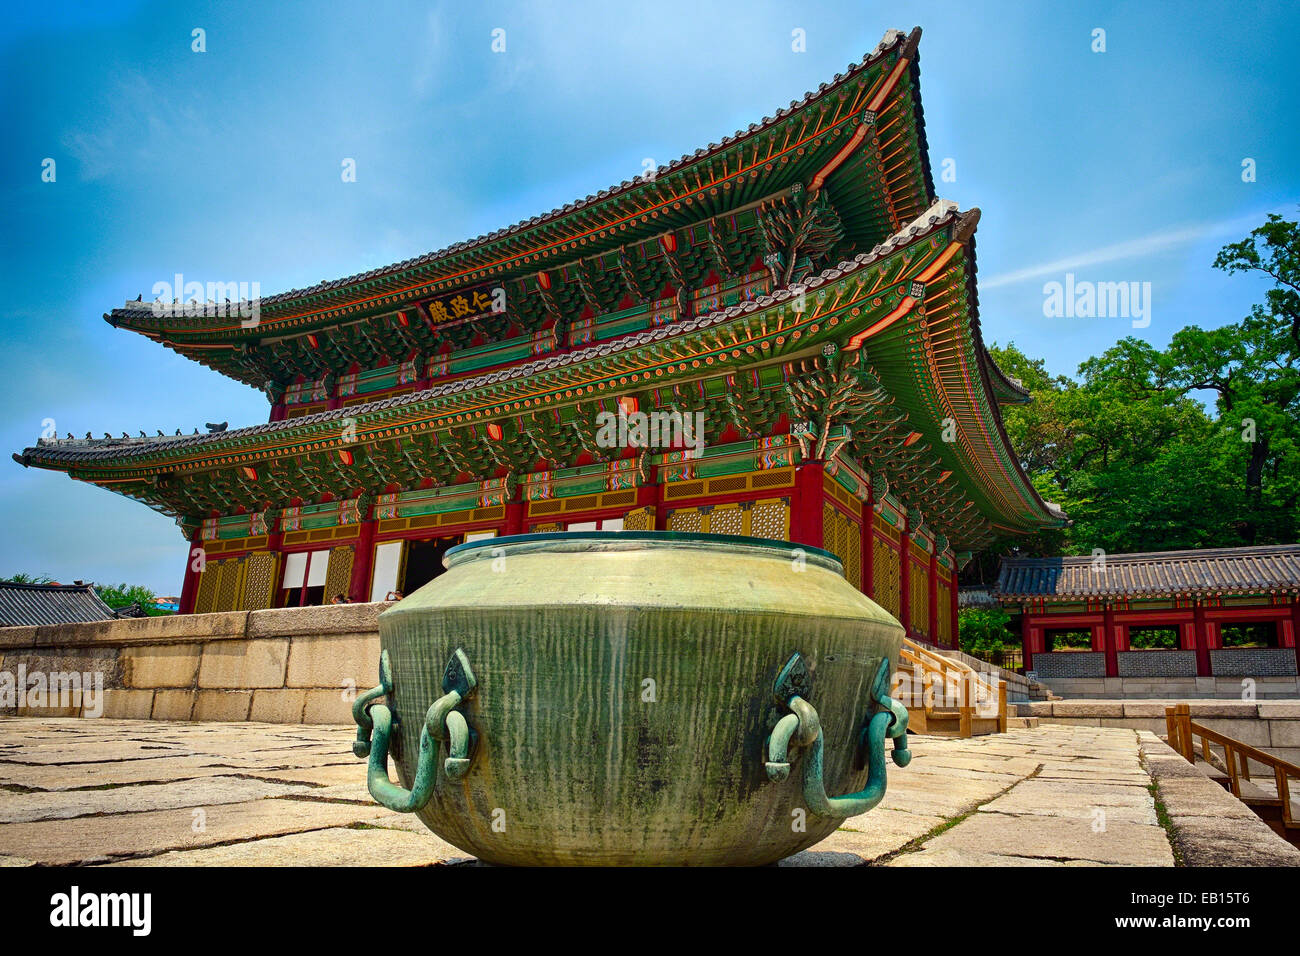 View of the Geunjeongjeon Hall (Throne Hall) with an Incense Kettle in the Foreground, Gyeongbokgung Palace, Seoul, South Korea Stock Photo